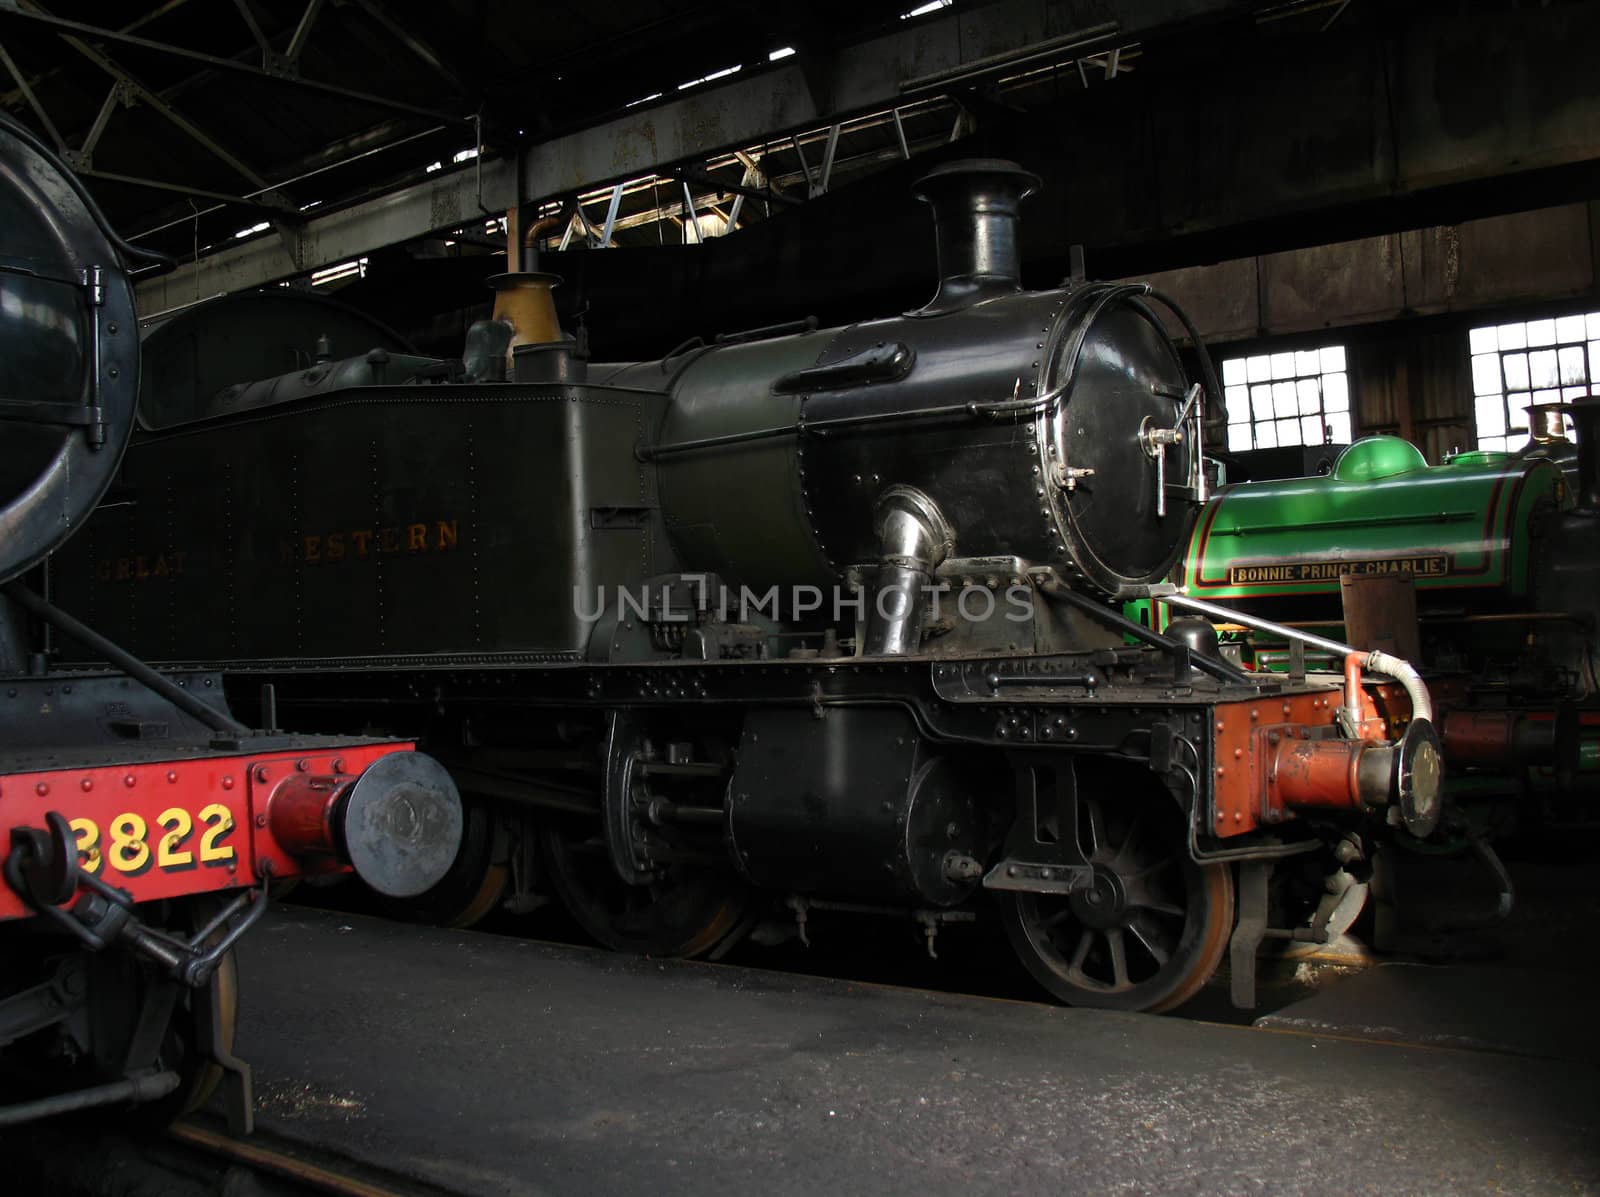 Steam trains in shed at the Didcot Railway Centre, Oxfordshire by tommroch